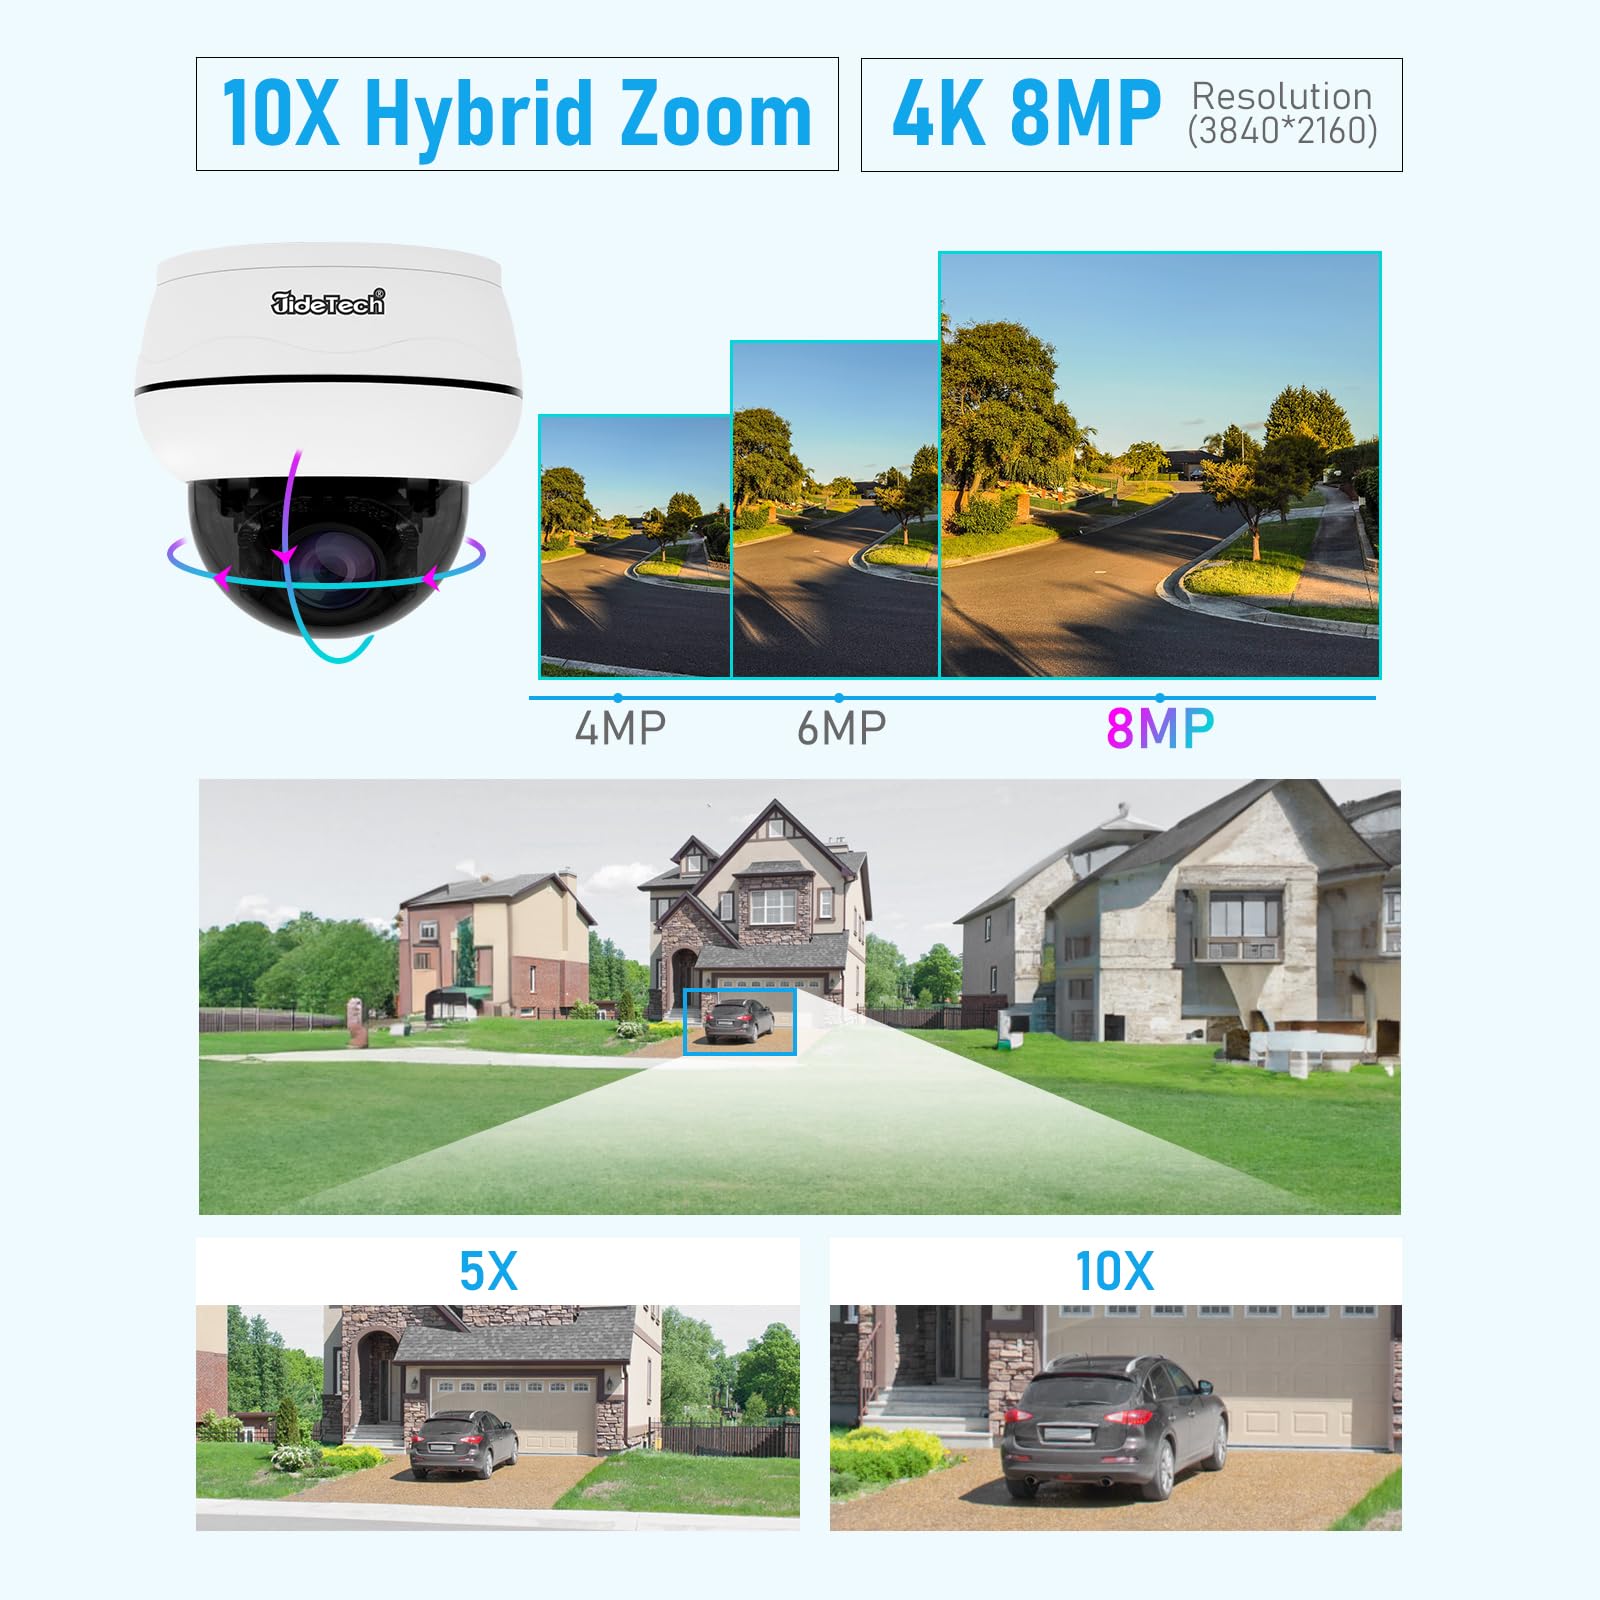 JideTech 10X Hybrid Zoom Outdoor 4K 8MP PTZ PoE IP Dome Camera, Auto Tracking, Pan Tilt Camera with IR Night Vision, Human/Vehicle Detection, Two Way Talk, SD Card Slot, Compatible for Hikvision, IP66